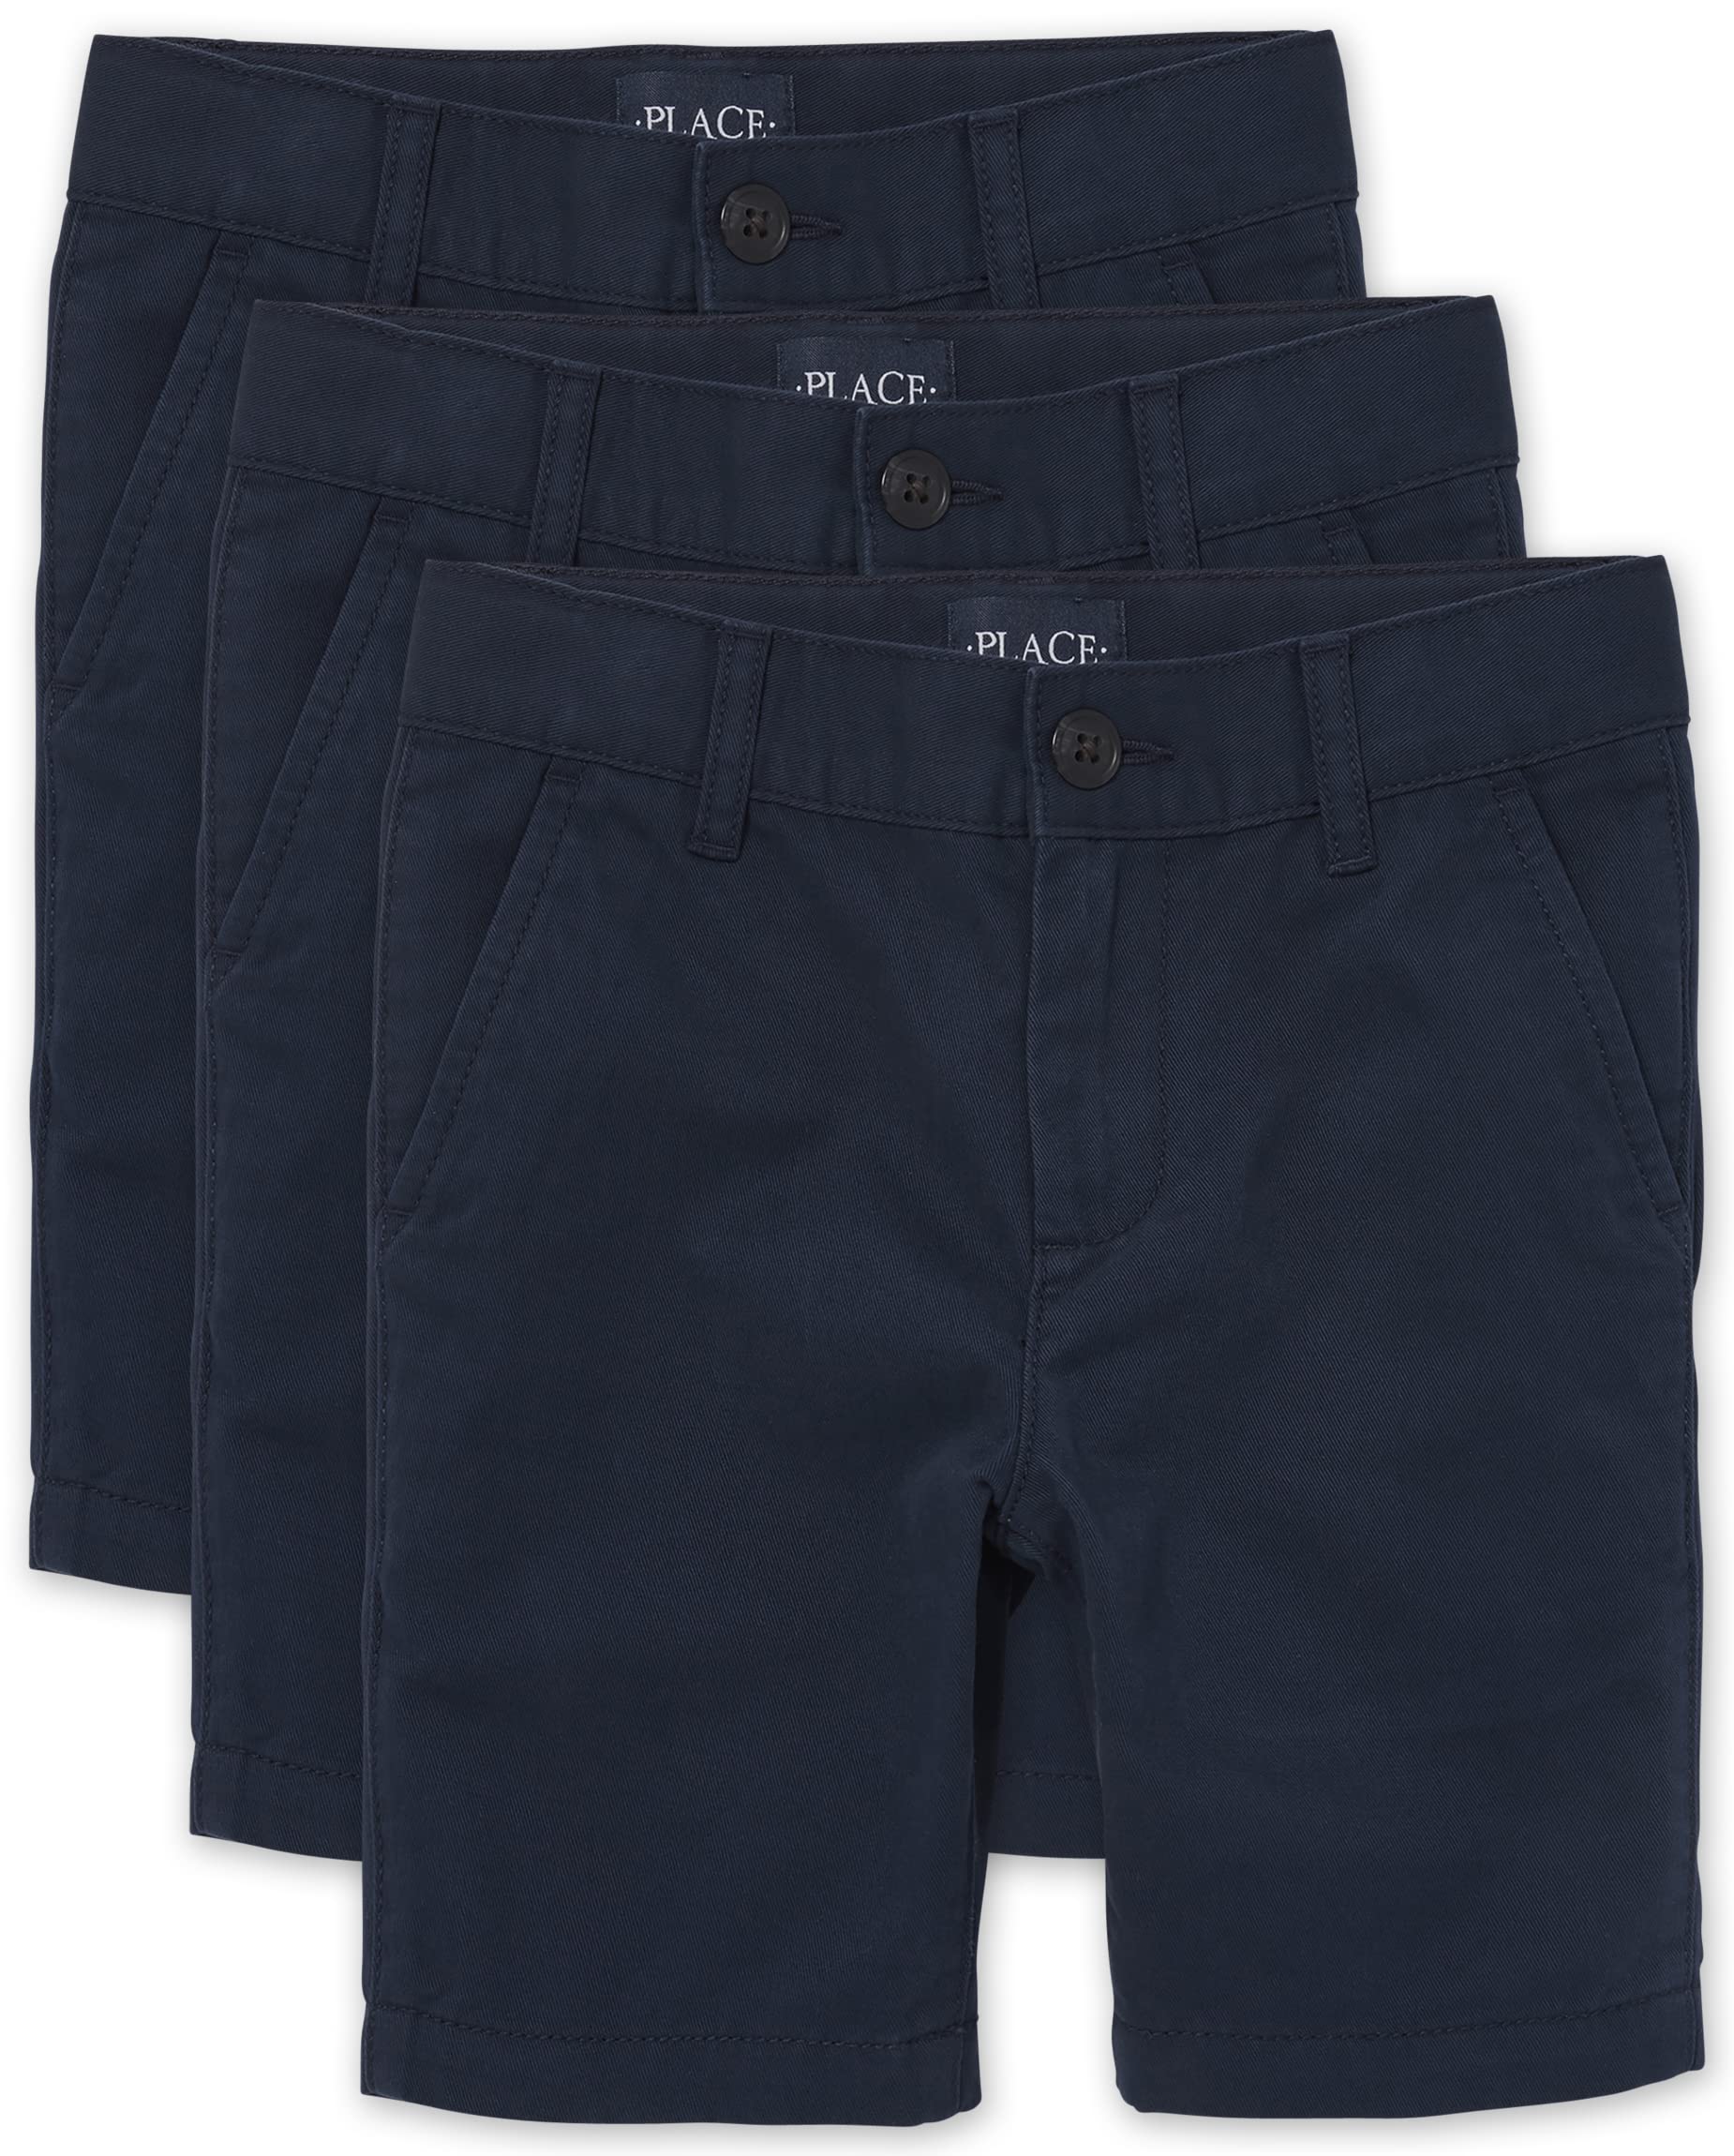 The Children's Place boys Stretch Chino Shorts